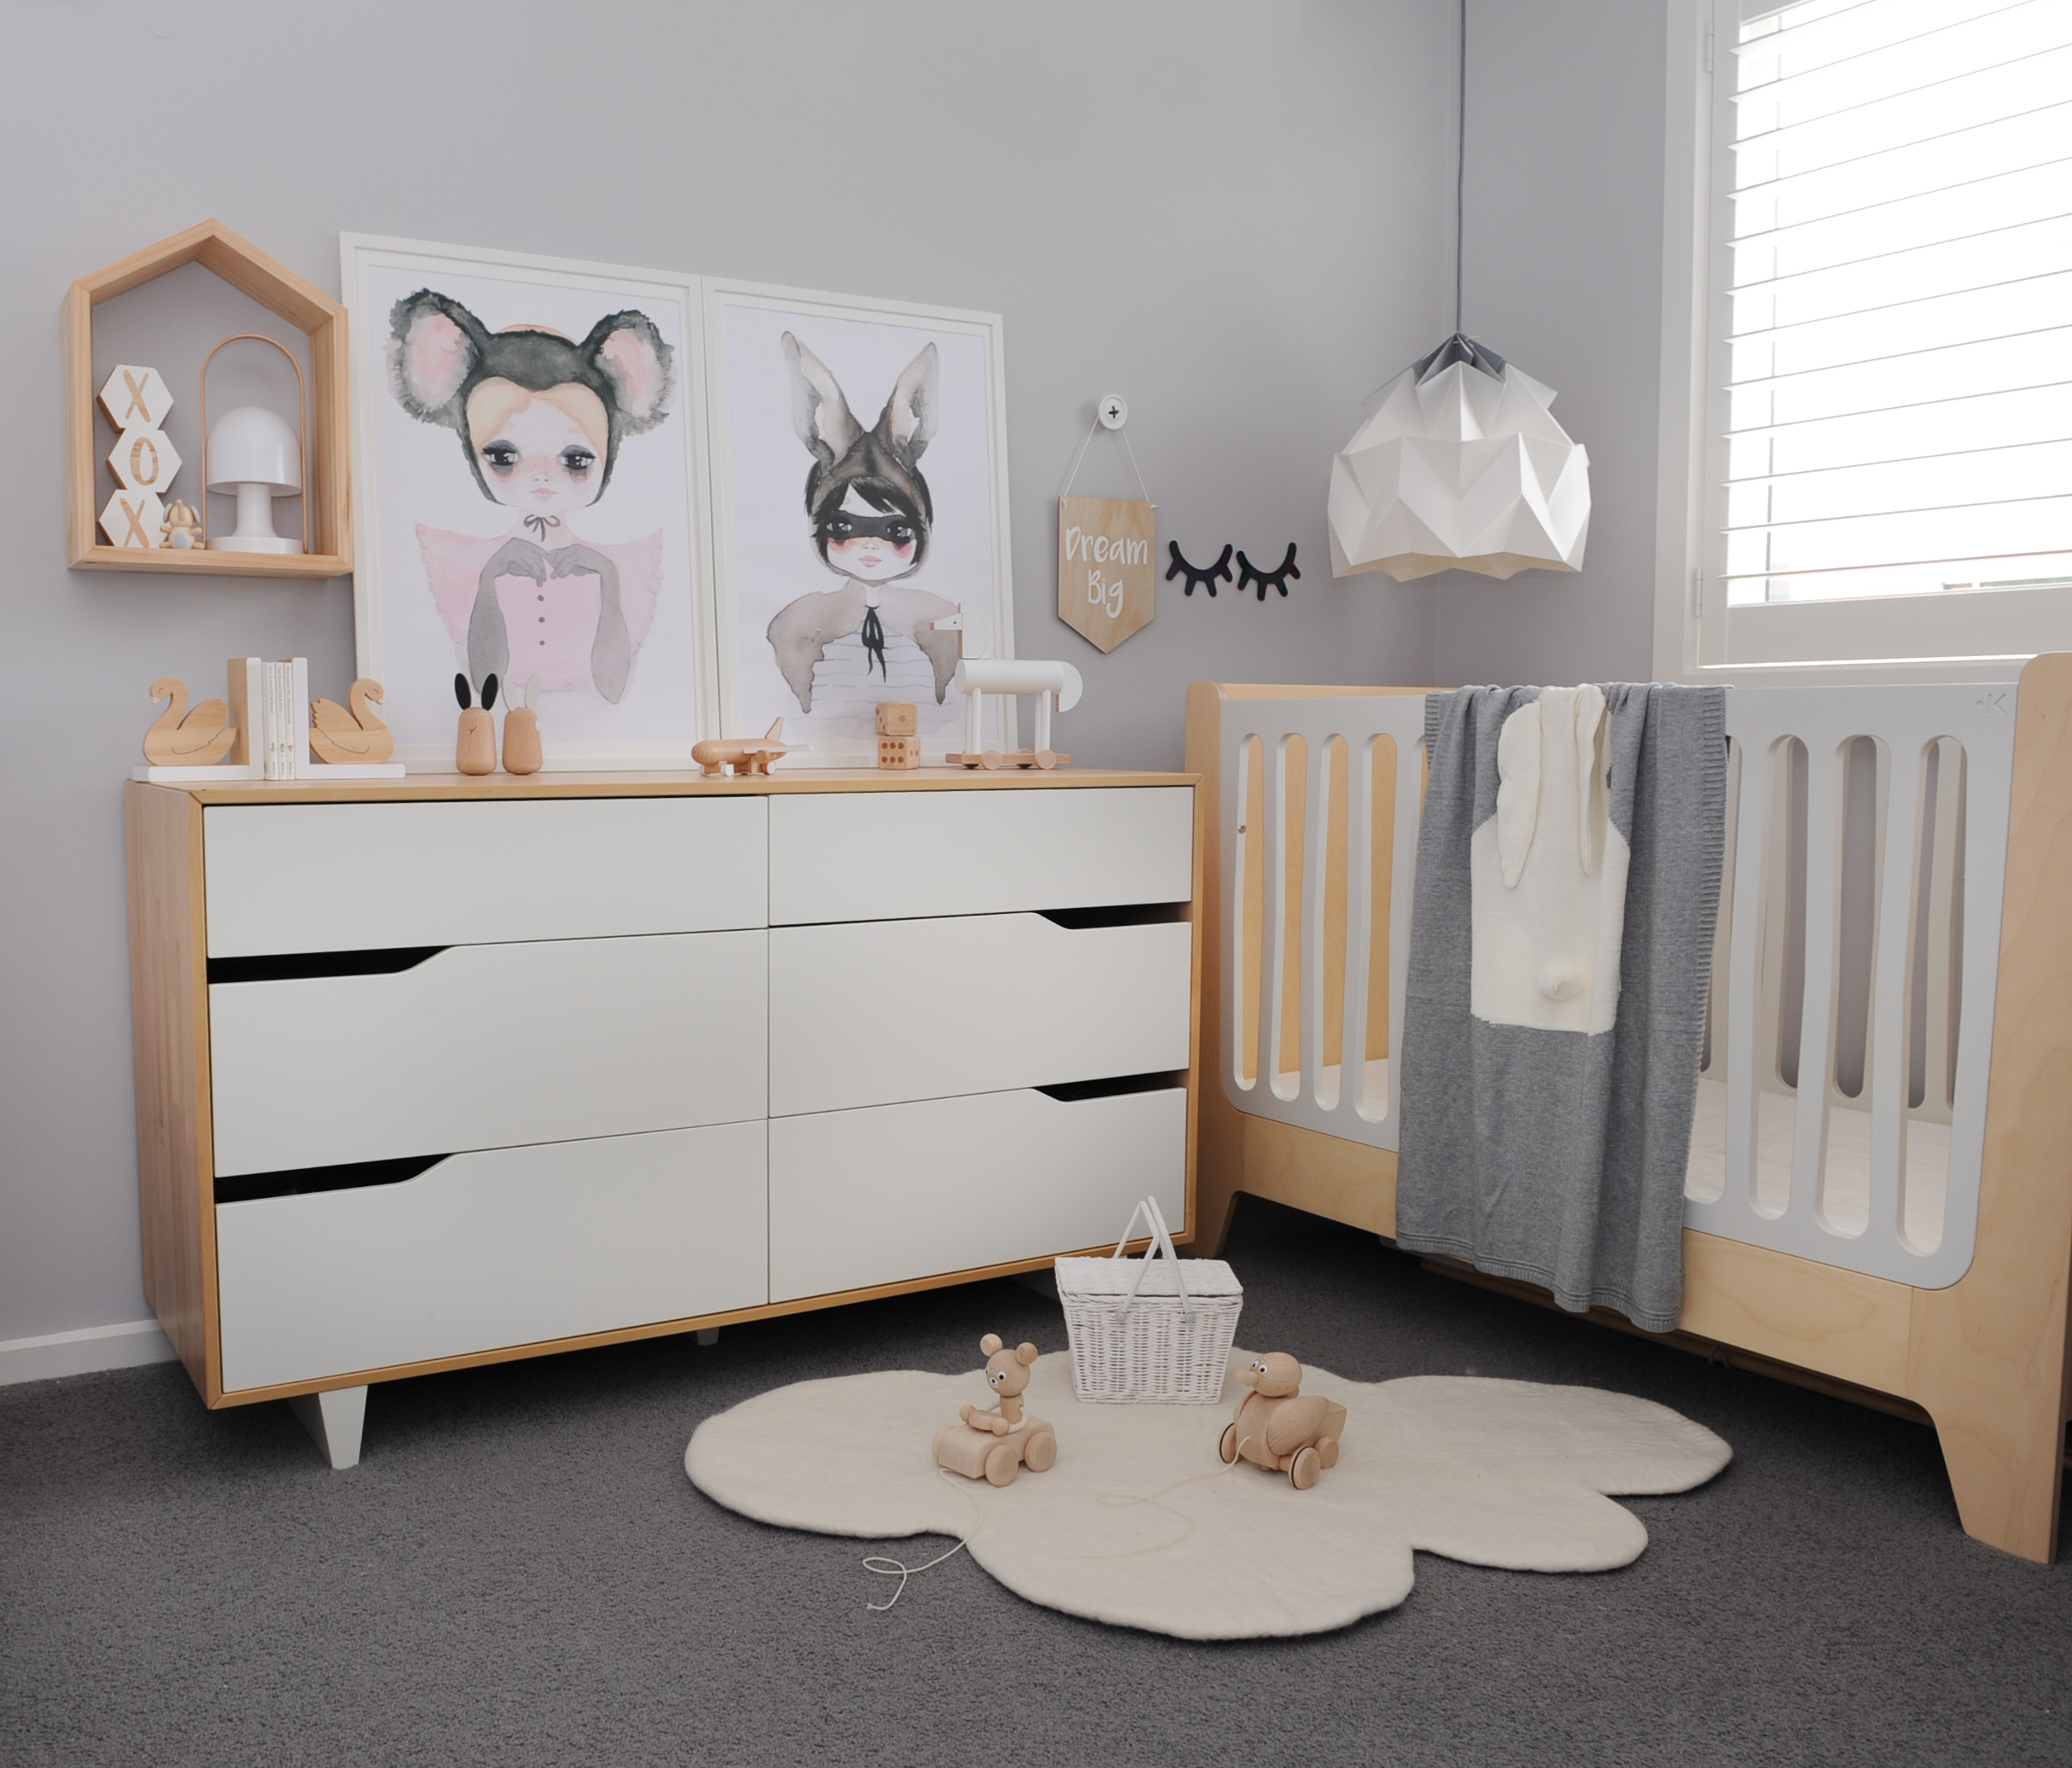 How To Choose The Best Flooring For Your Kids Rooms Minty Magazine